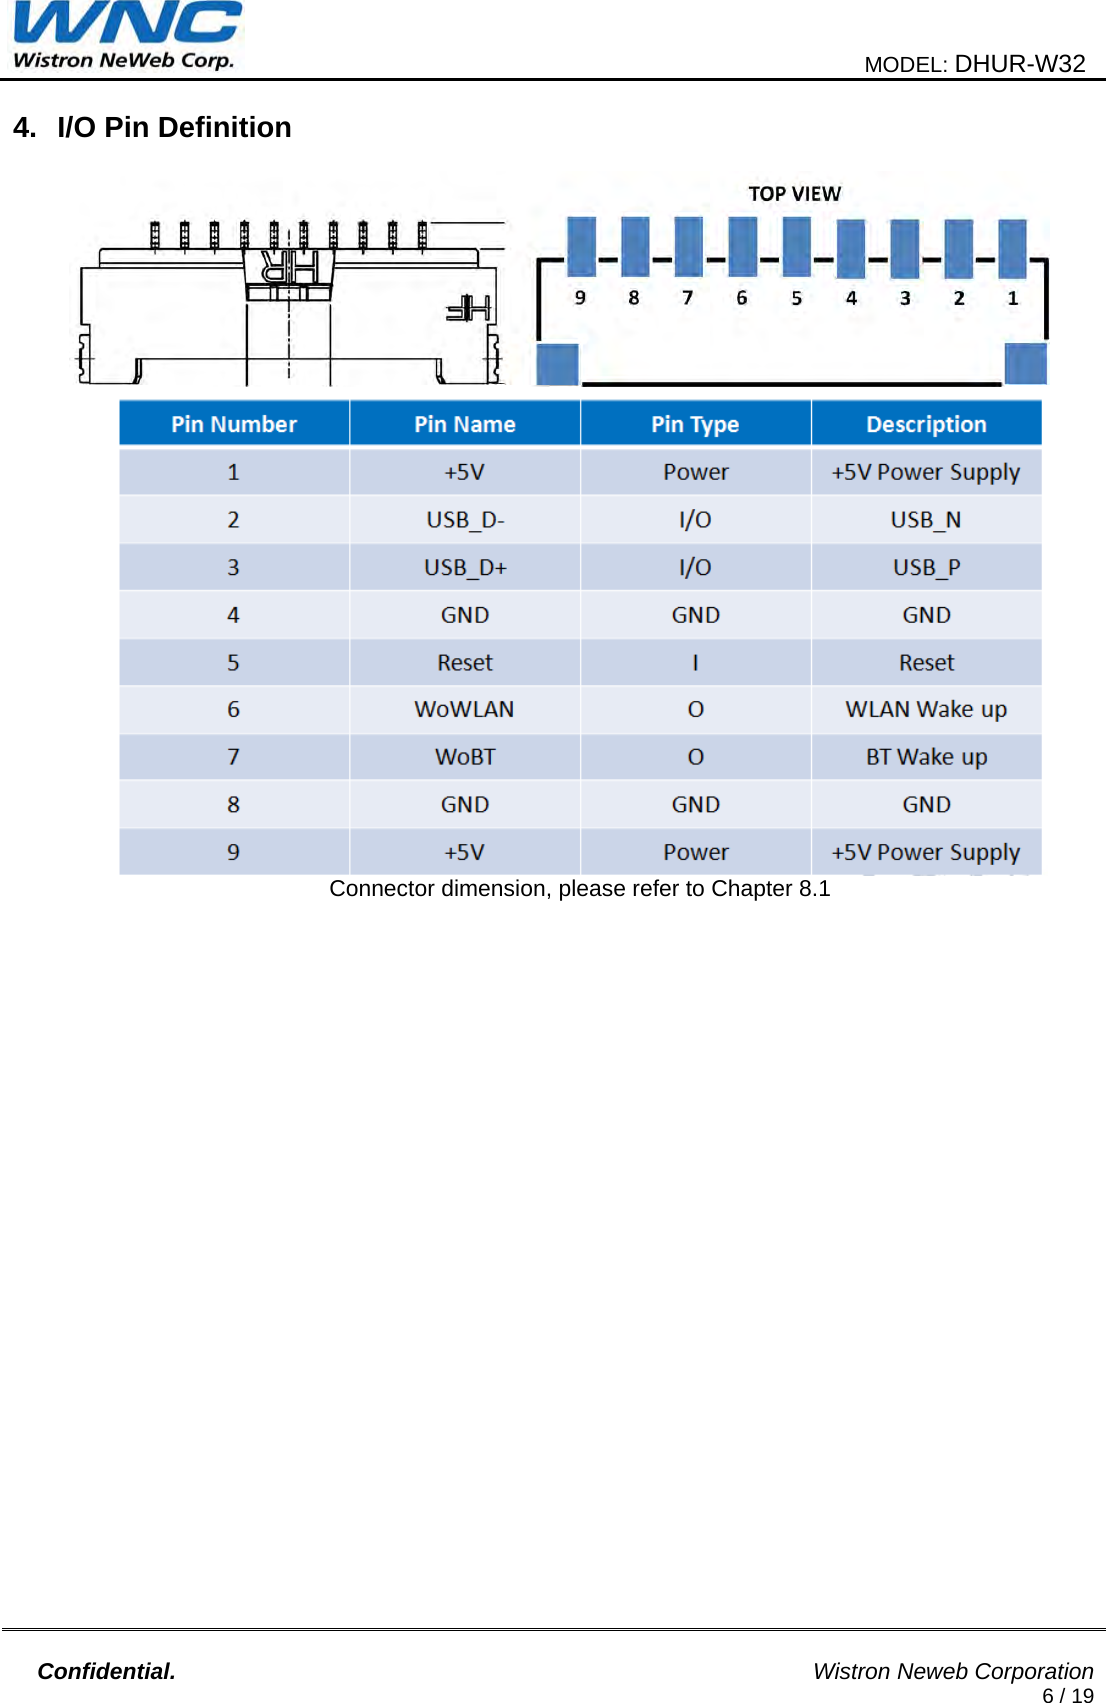                                                                                             MODEL: DHUR-W32    Confidential.                                                                                                    Wistron Neweb Corporation 6 / 19   4. I/O Pin Definition    Connector dimension, please refer to Chapter 8.1                          